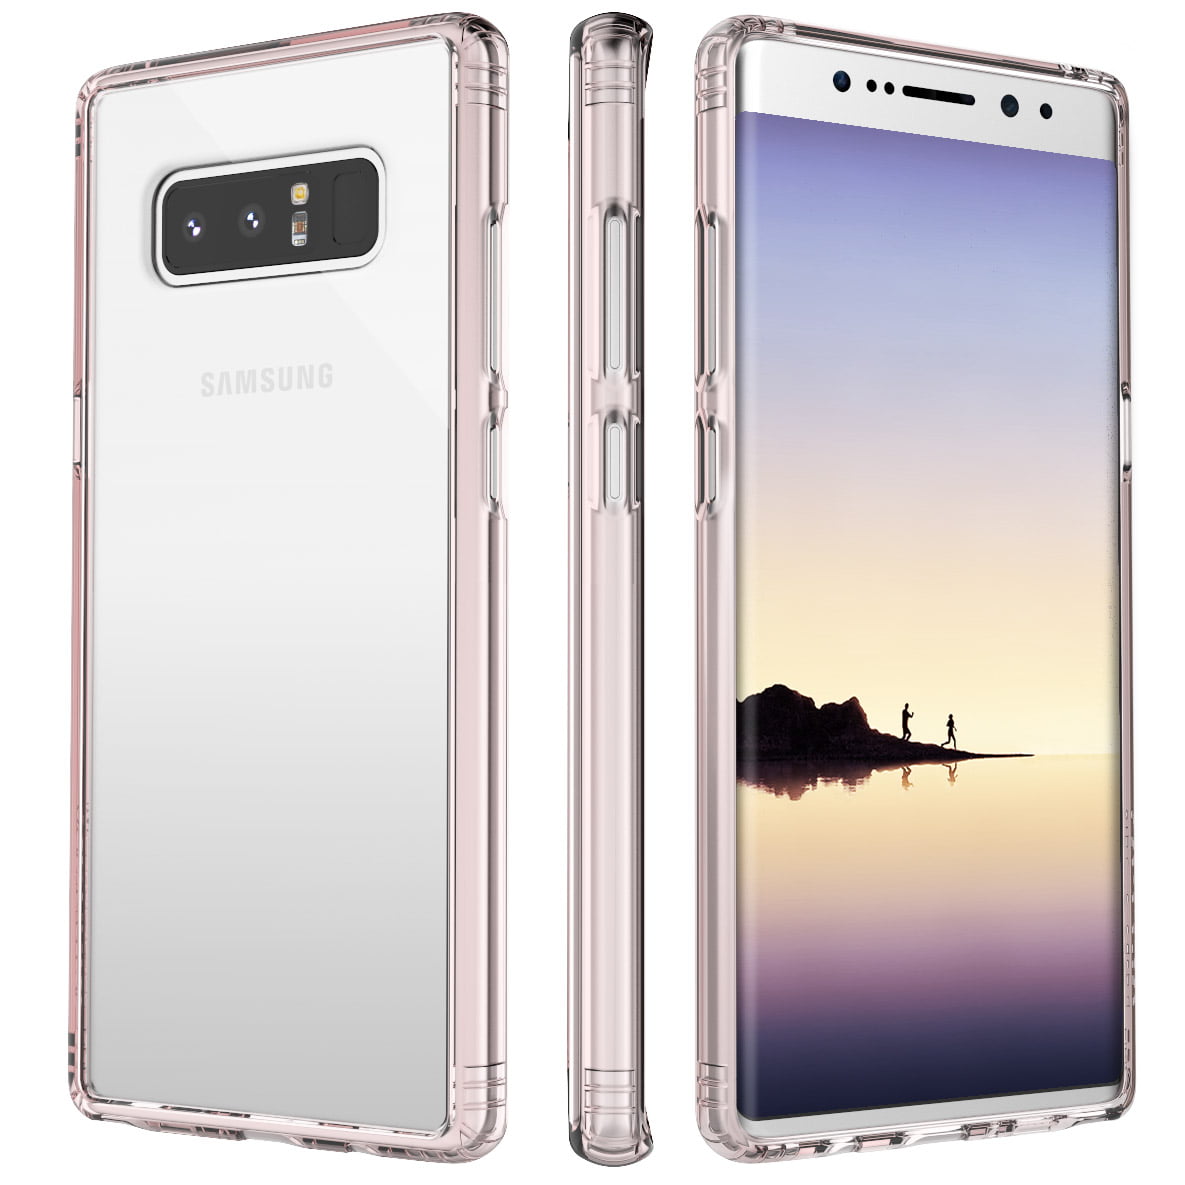 woede Ecologie Gemengd Saharacase Ocl-S-N8-Rog/Cl Classic Case For Samsung Galaxy Note 8, Rose  Gold Clear - Walmart.com